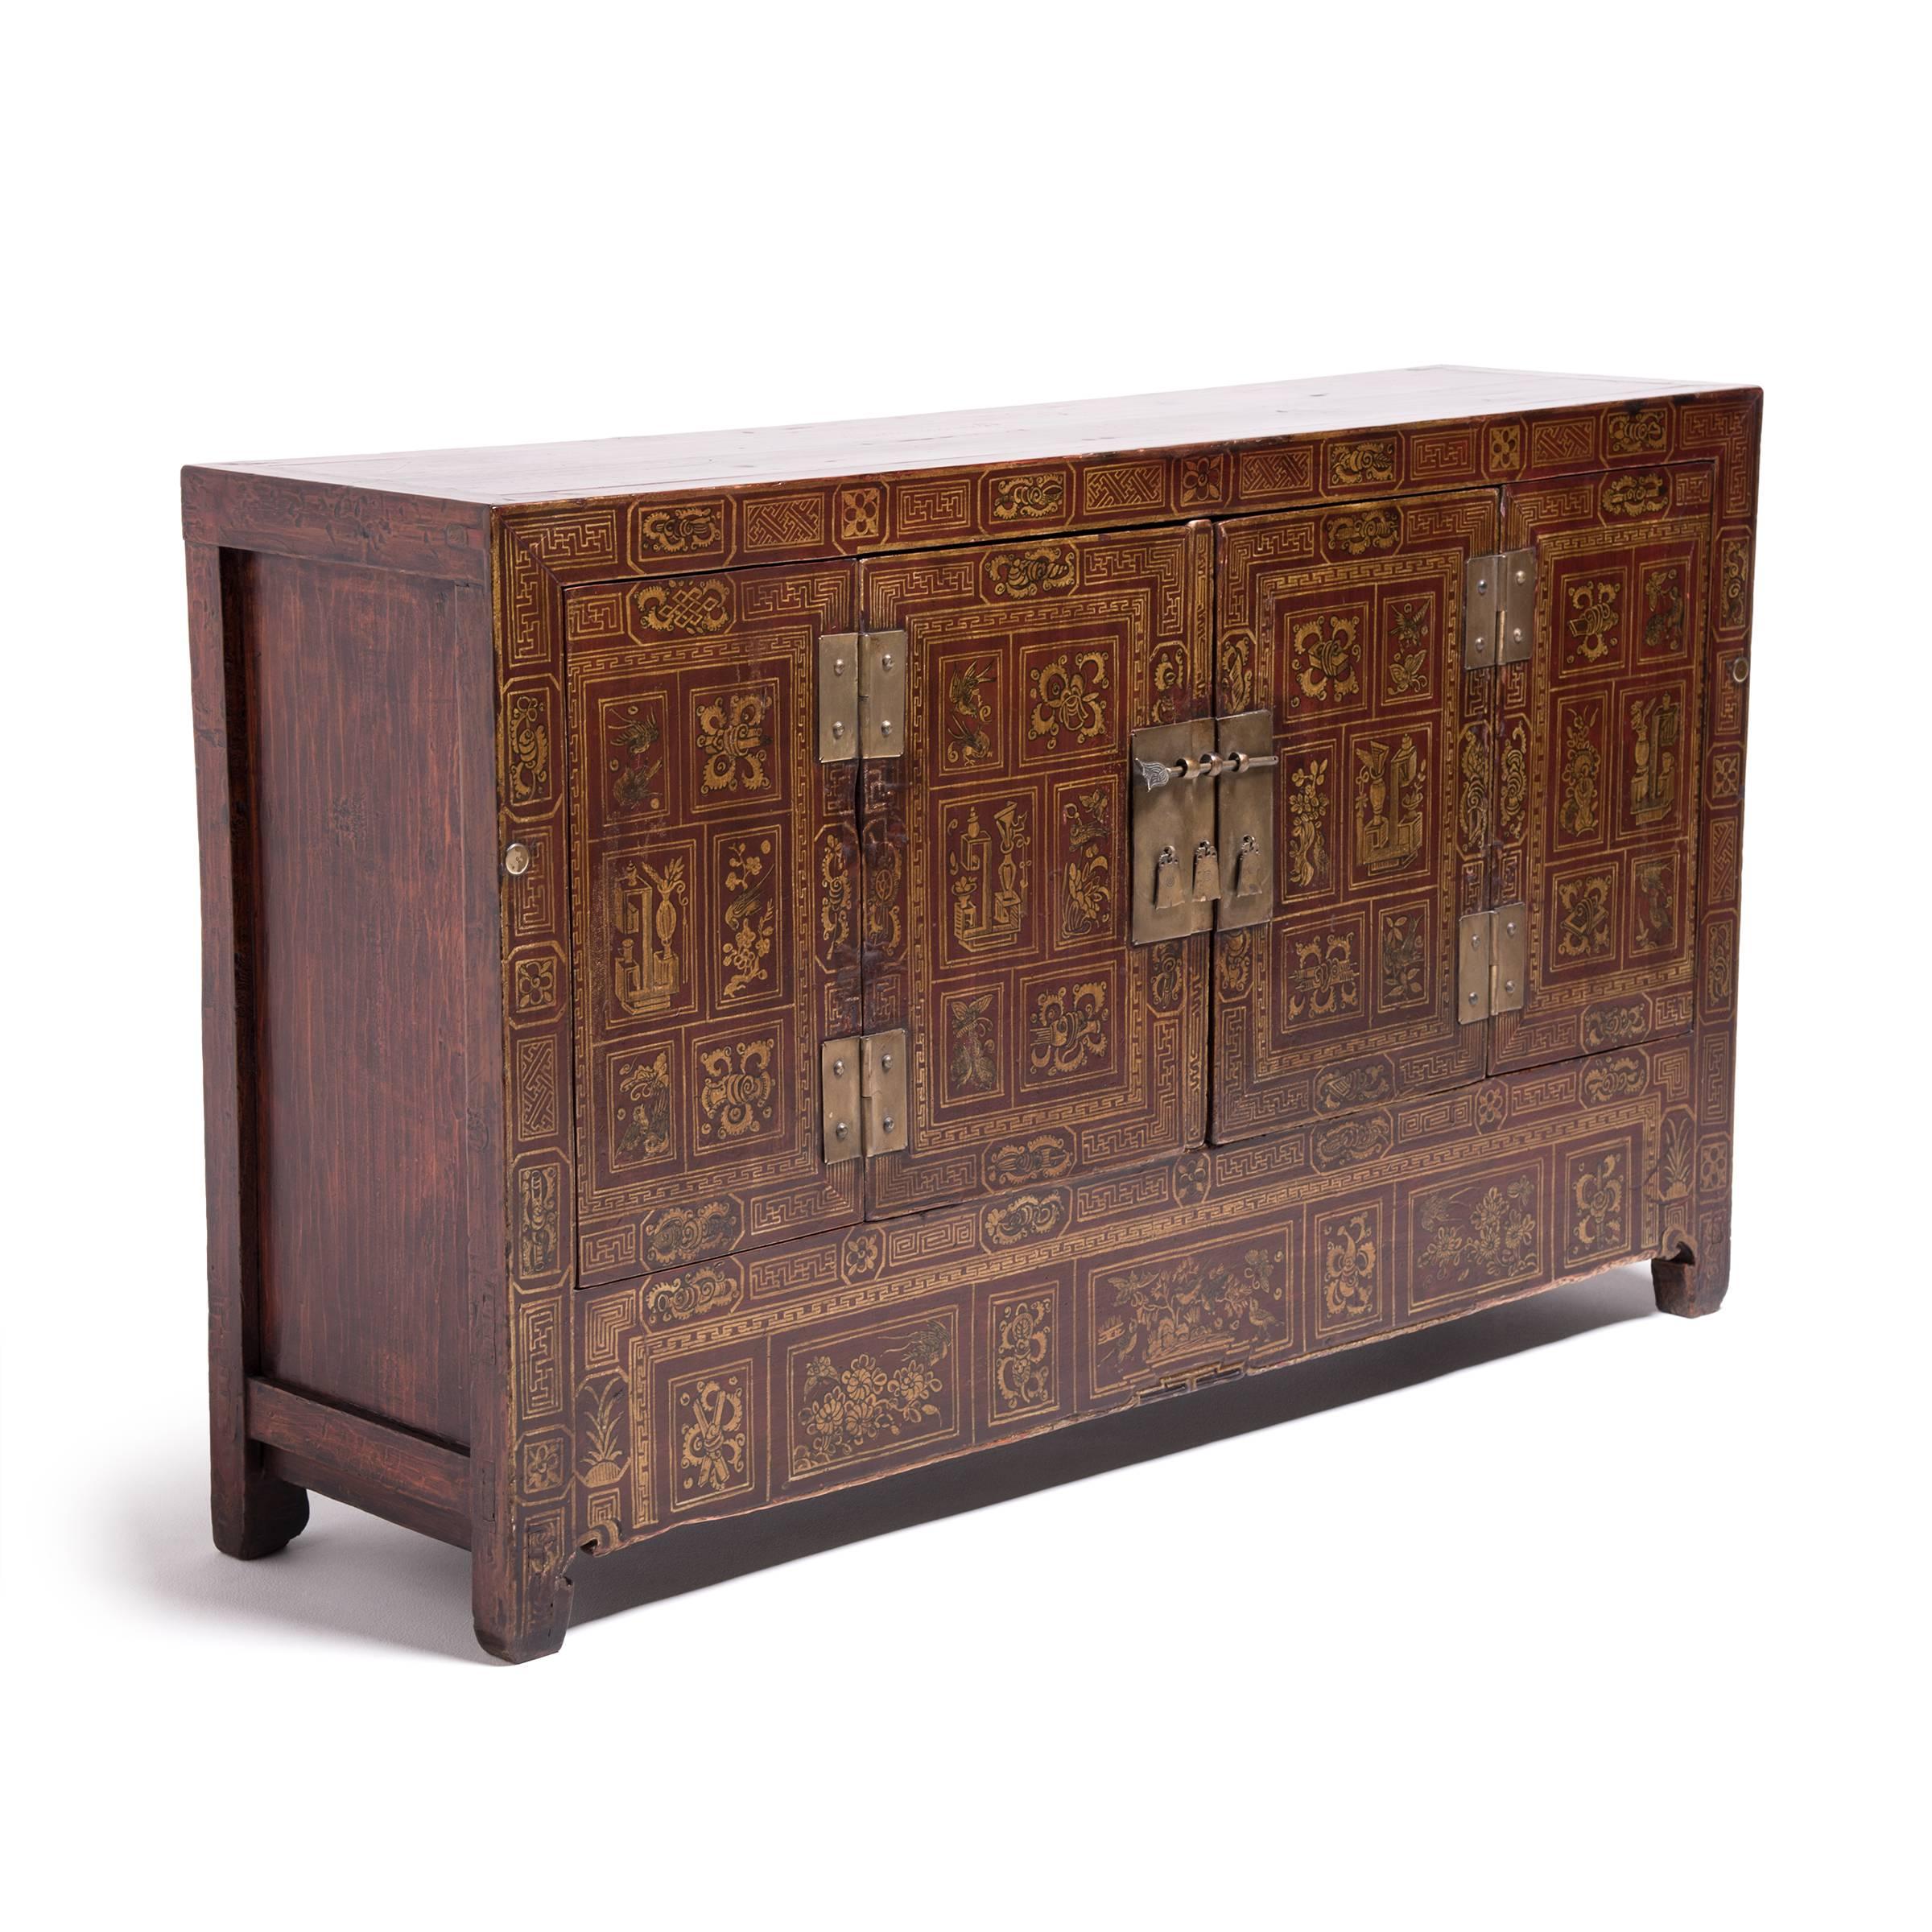 Rarely do you see a painted cabinet of this vintage in such flawless condition. This extraordinary cabinet is beautifully painted with images of auspicious birds, butterflies as well as books, scrolls and other treasures found in a scholar’s studio.